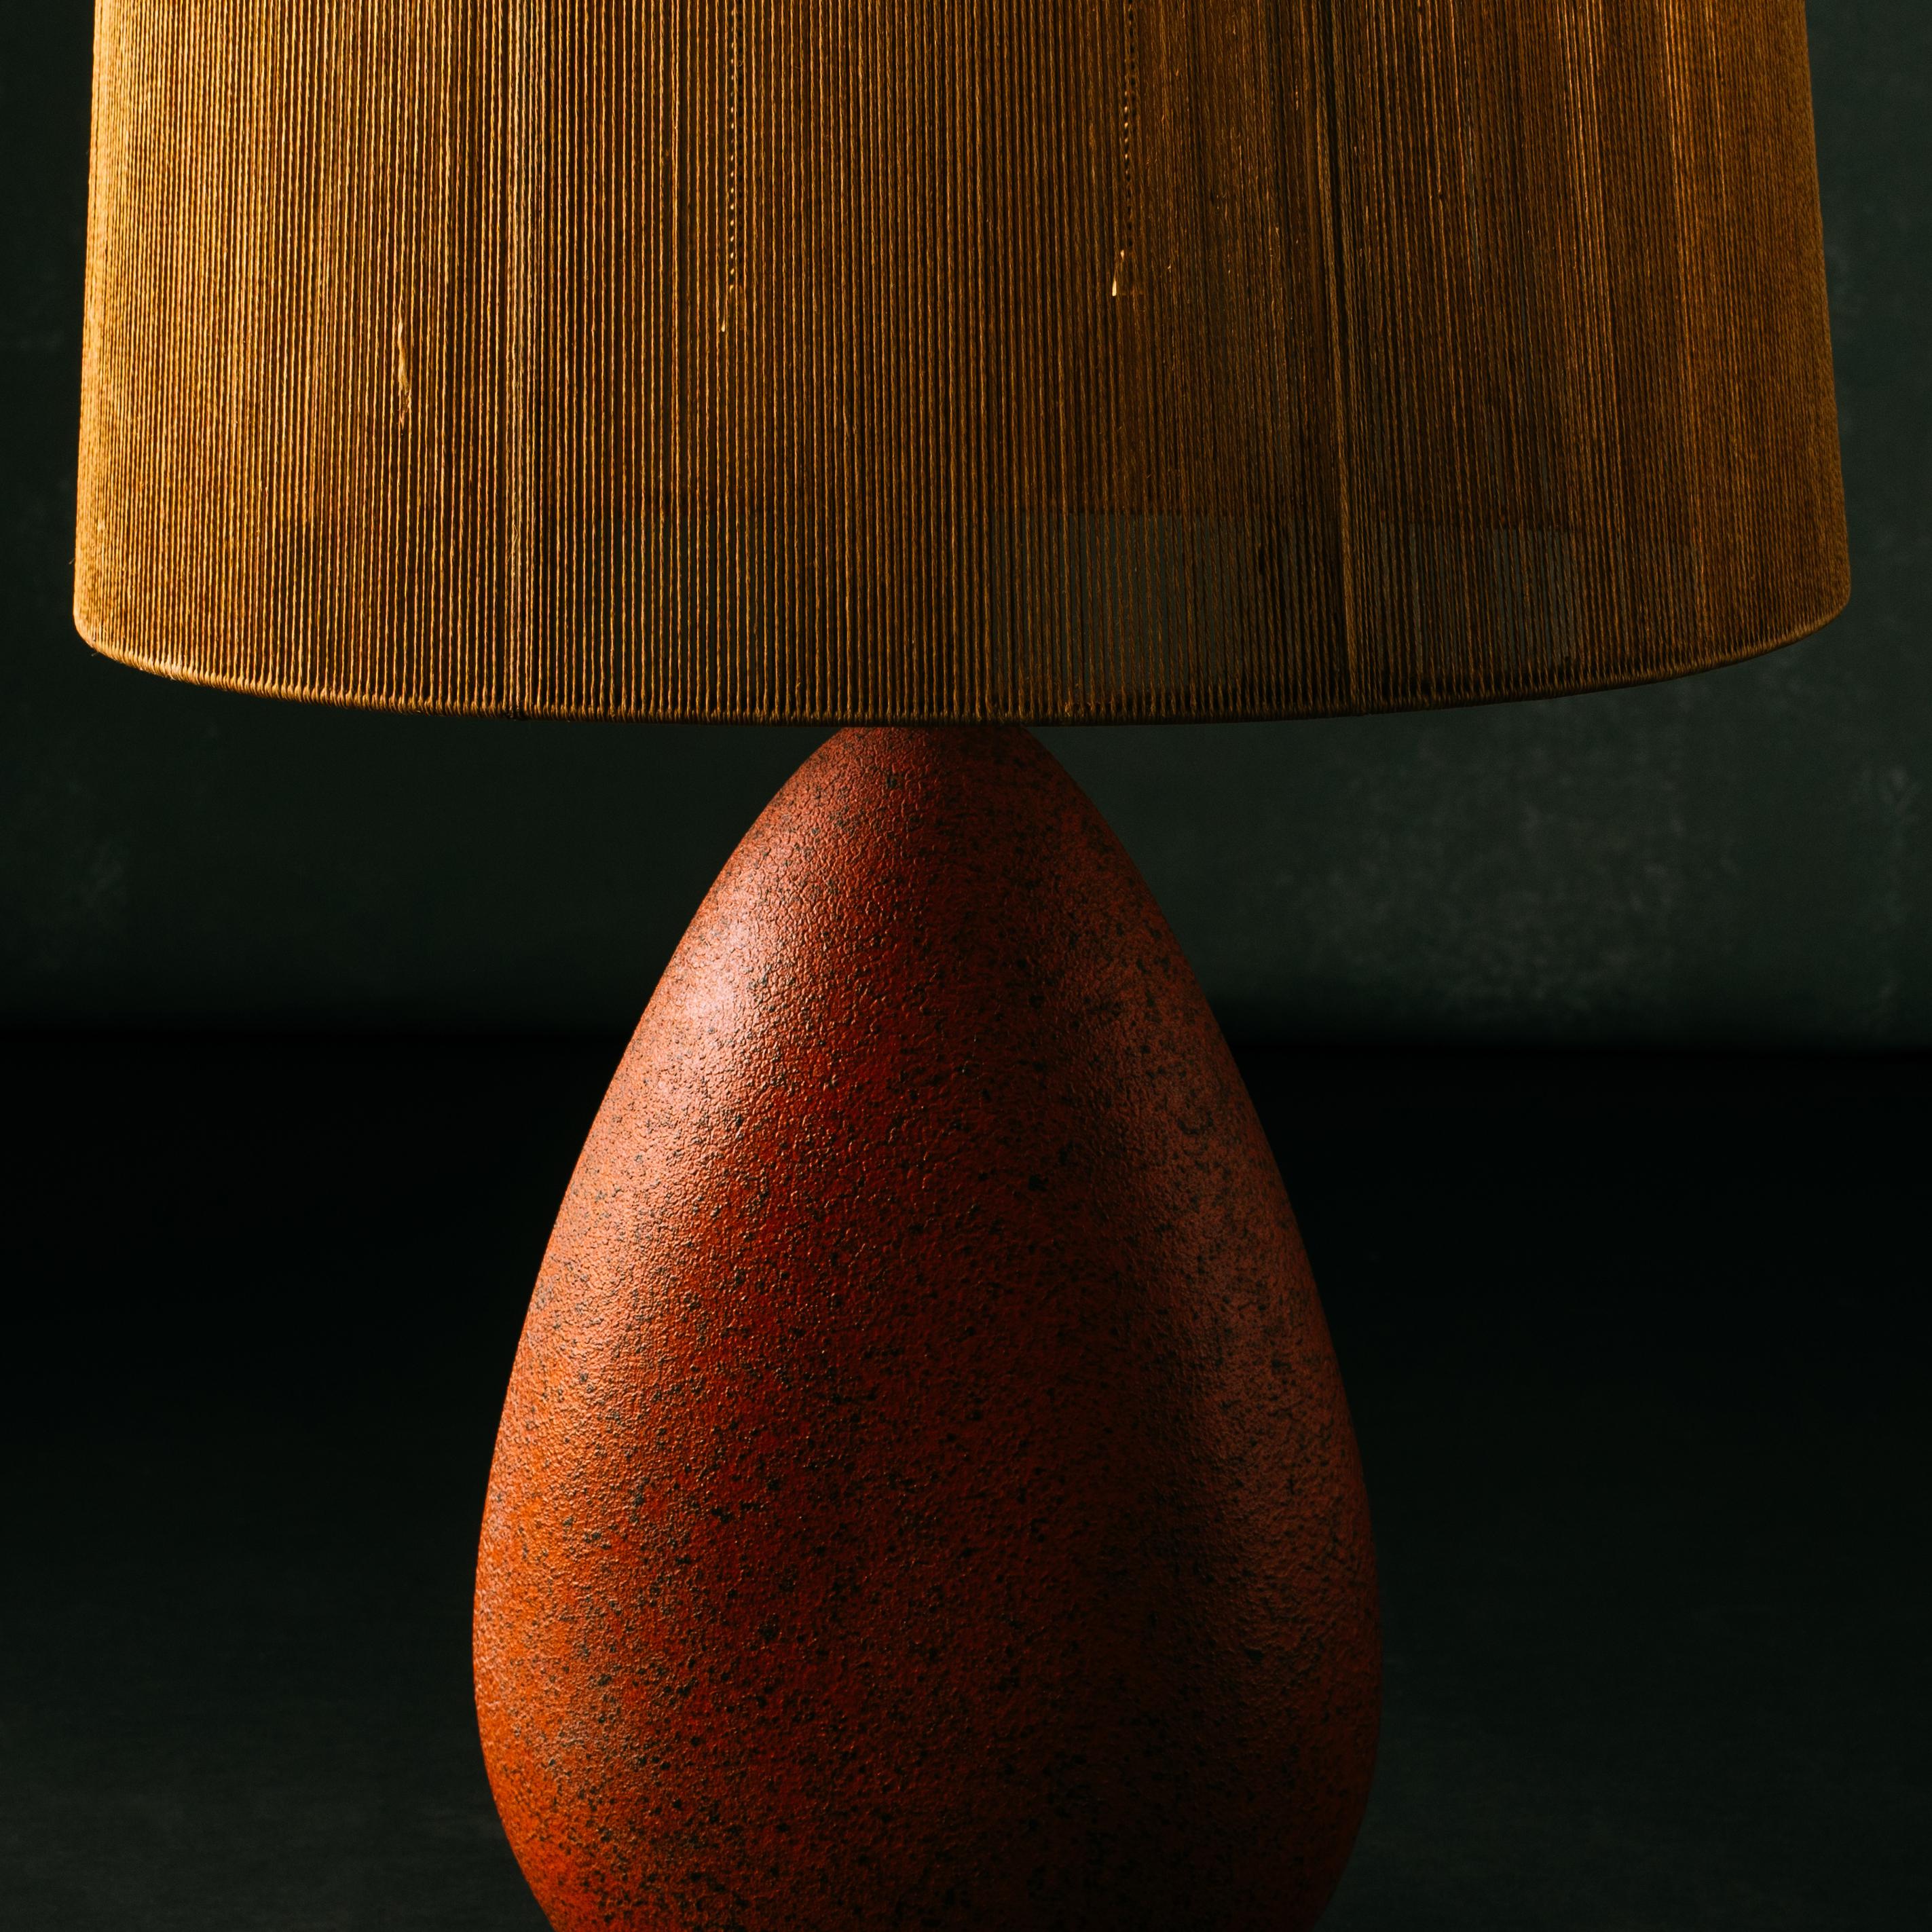 Mid-Century Modern Modernist Ceramic Table Lamp in Brick Red Glaze and Original String Shade, 1960s For Sale